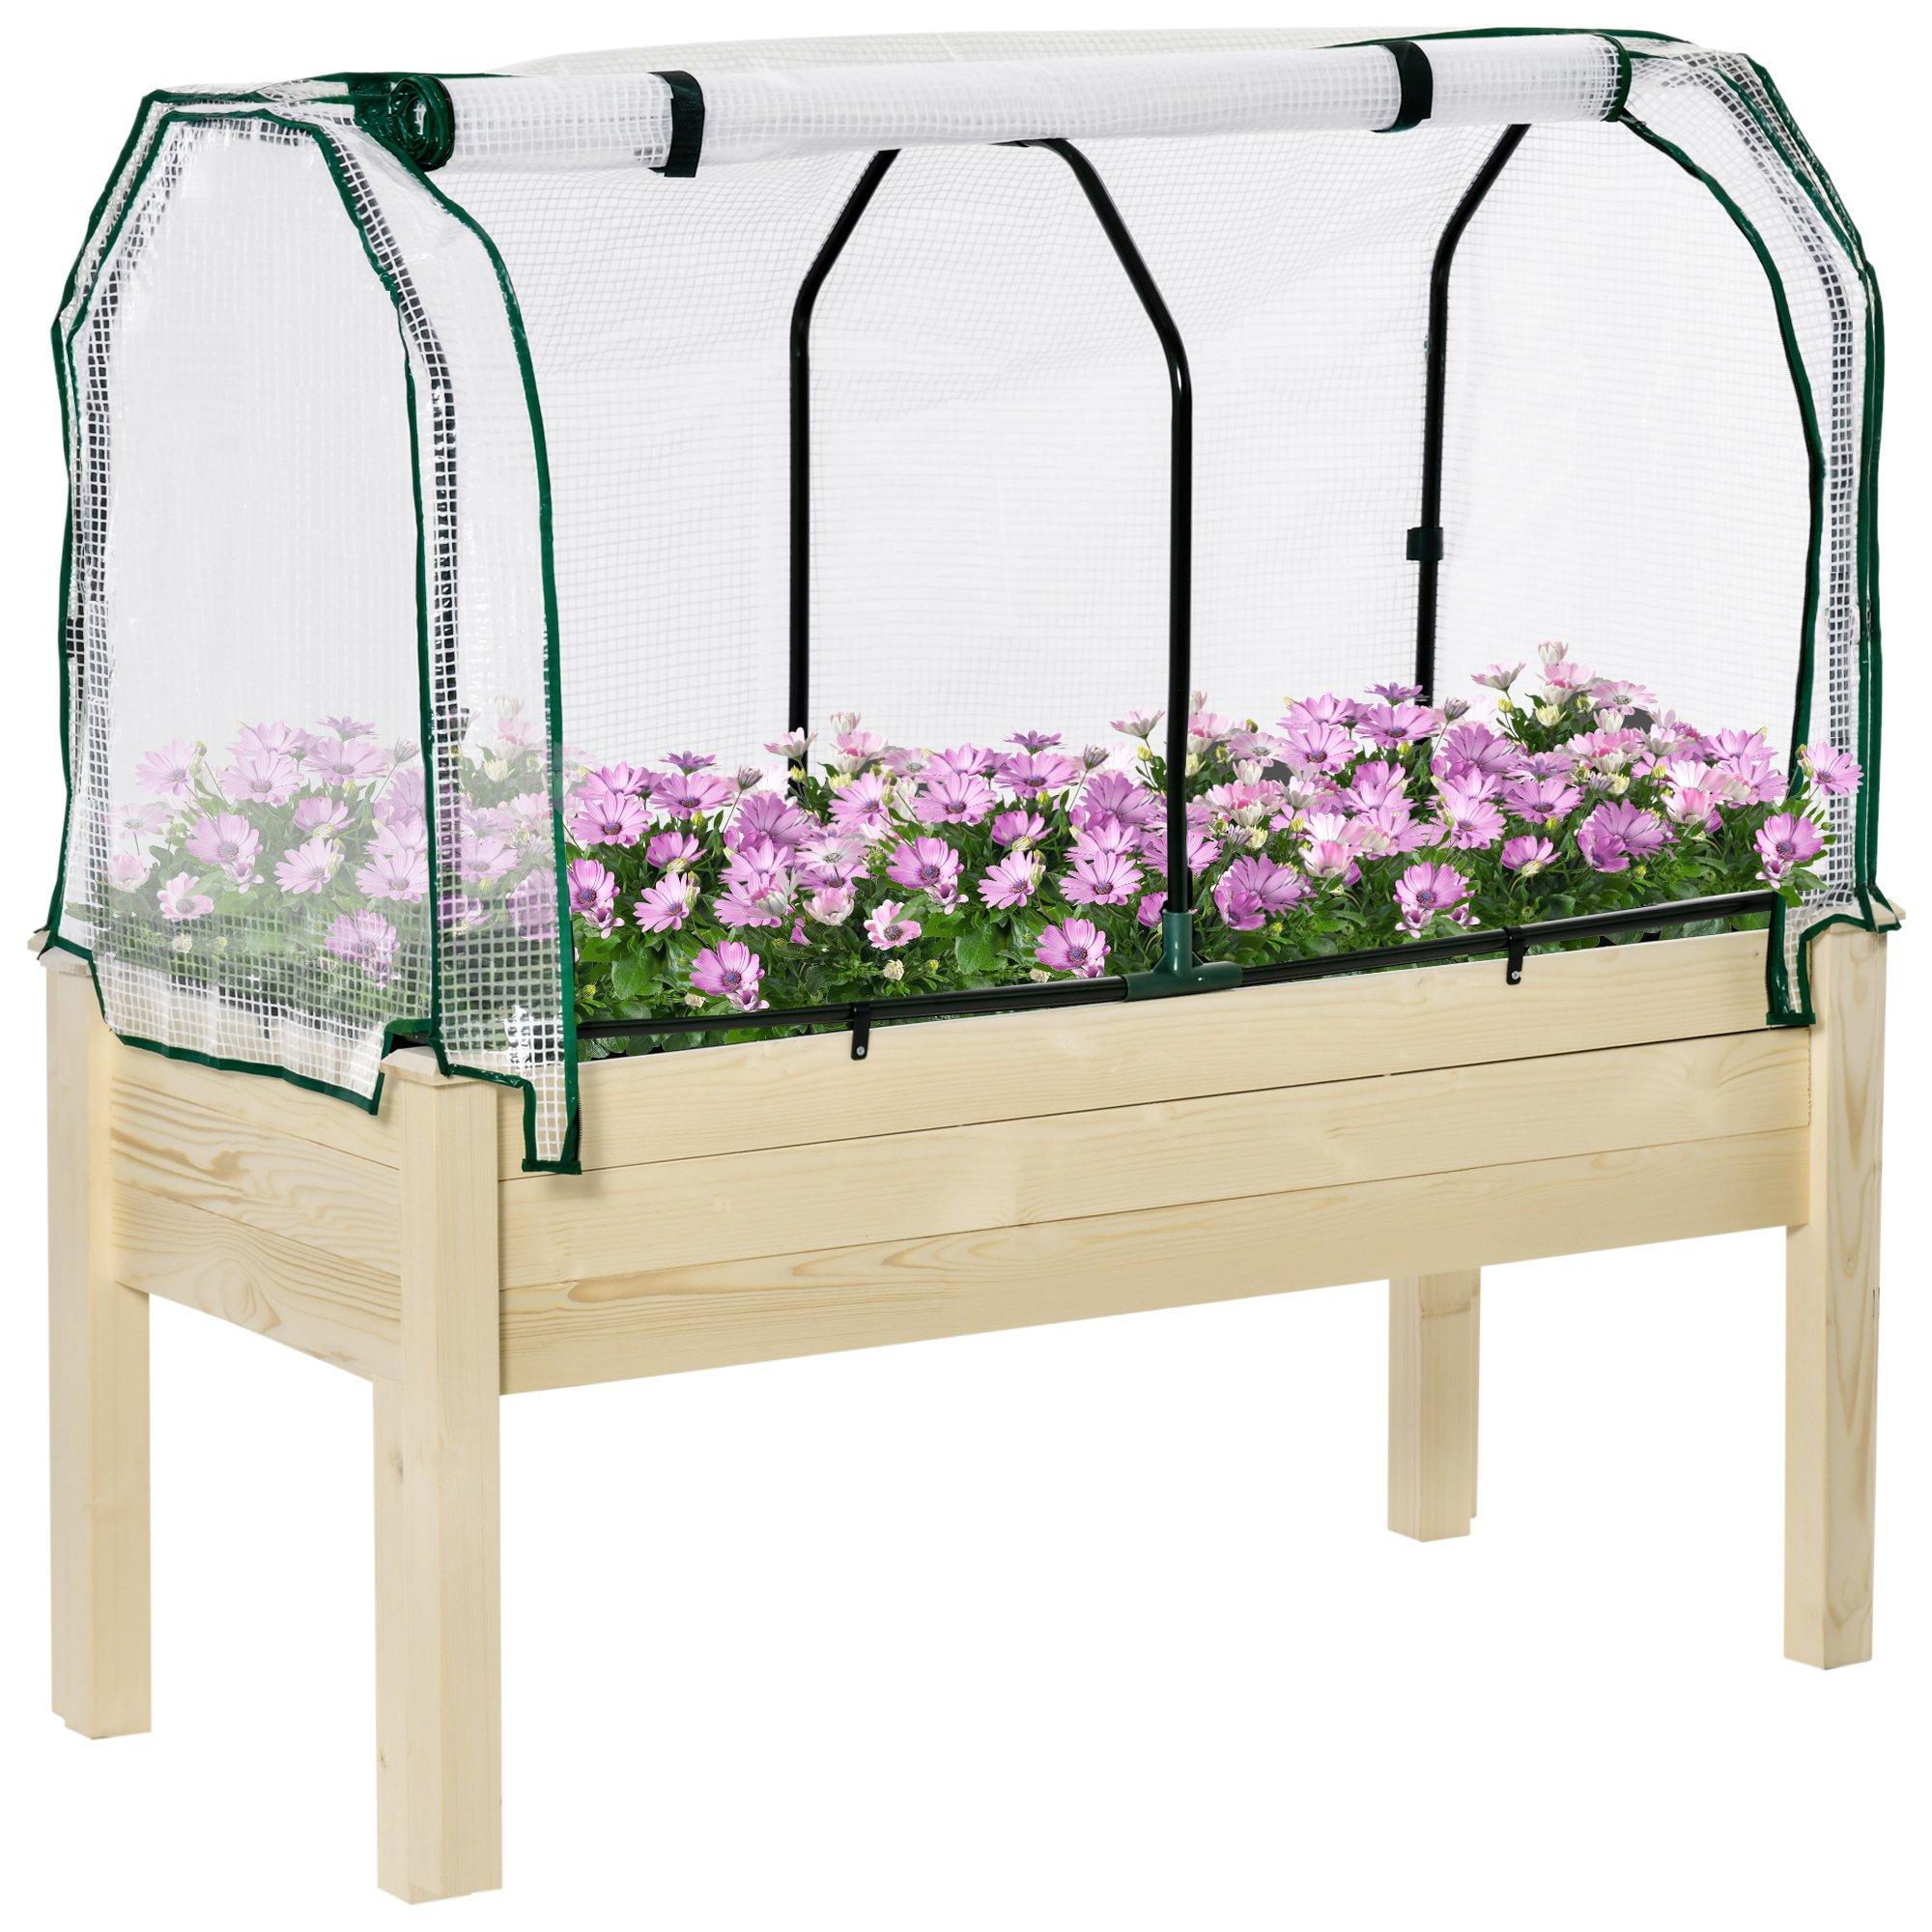 Raised Garden Bed w/ PE Cover Patio Elevated Wood Planter Box